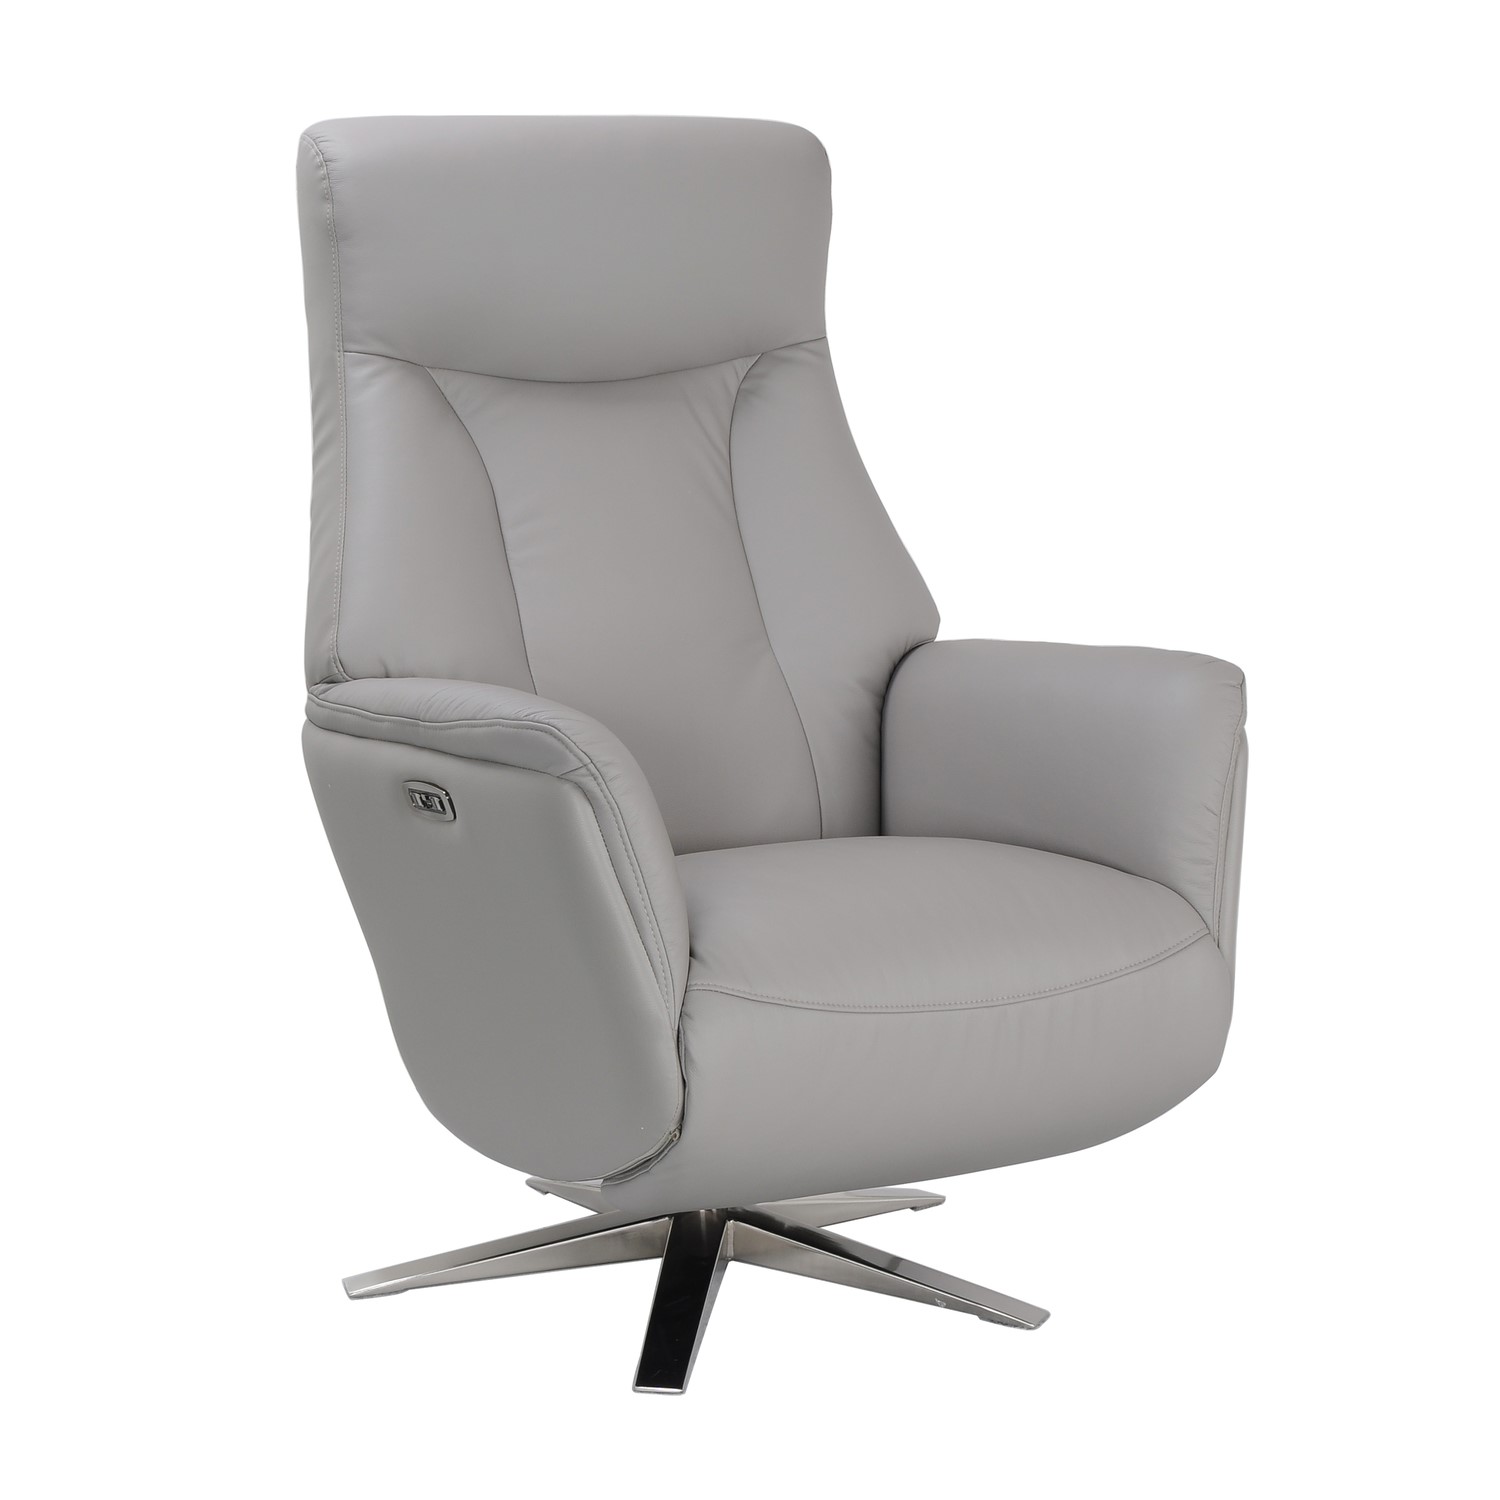 Photo of Light grey leather electric recliner armchair - houston